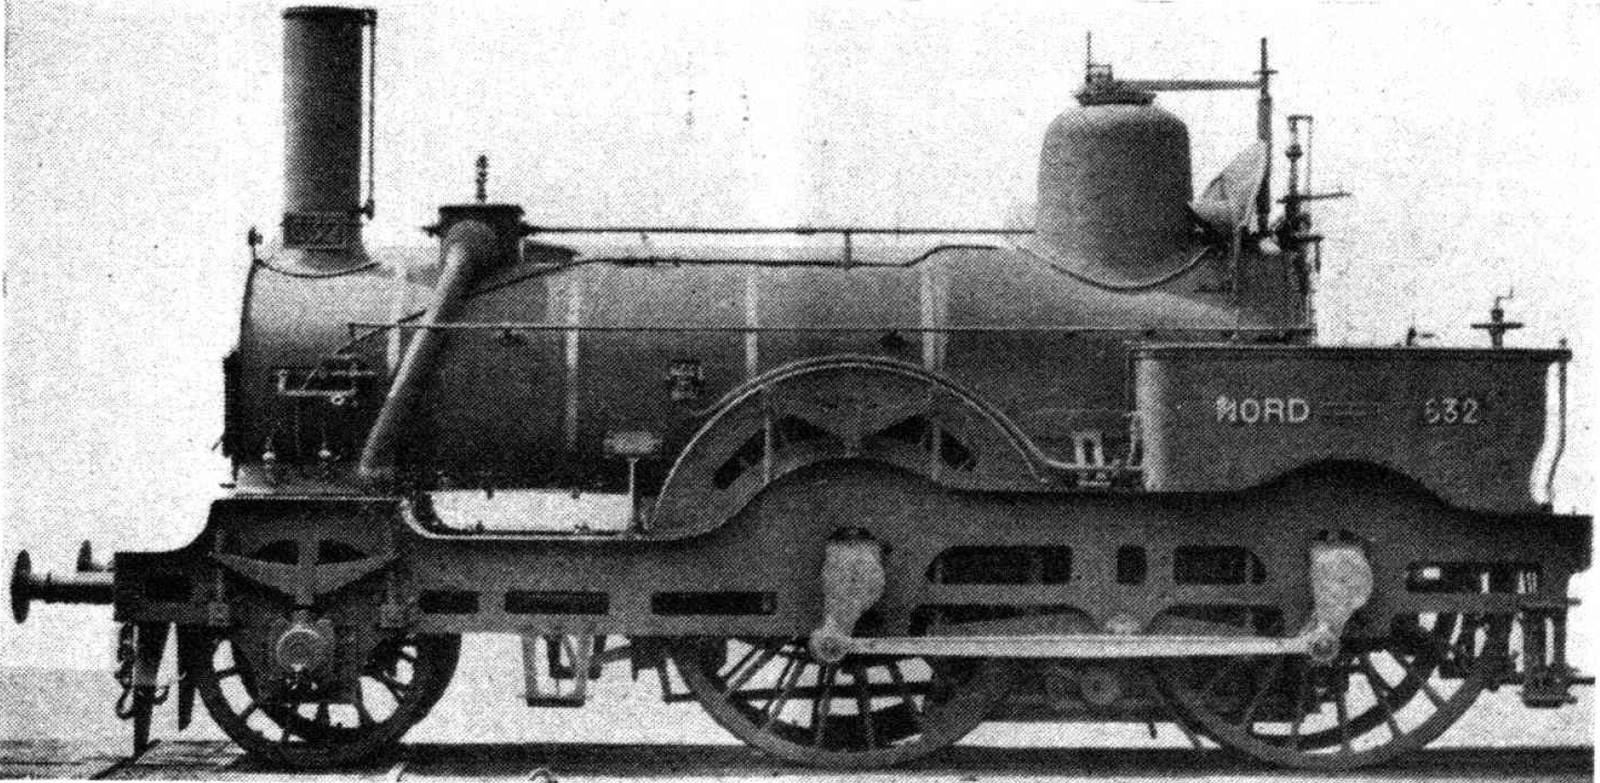 No. 632, later 2.822, in original condition as 2-4-0